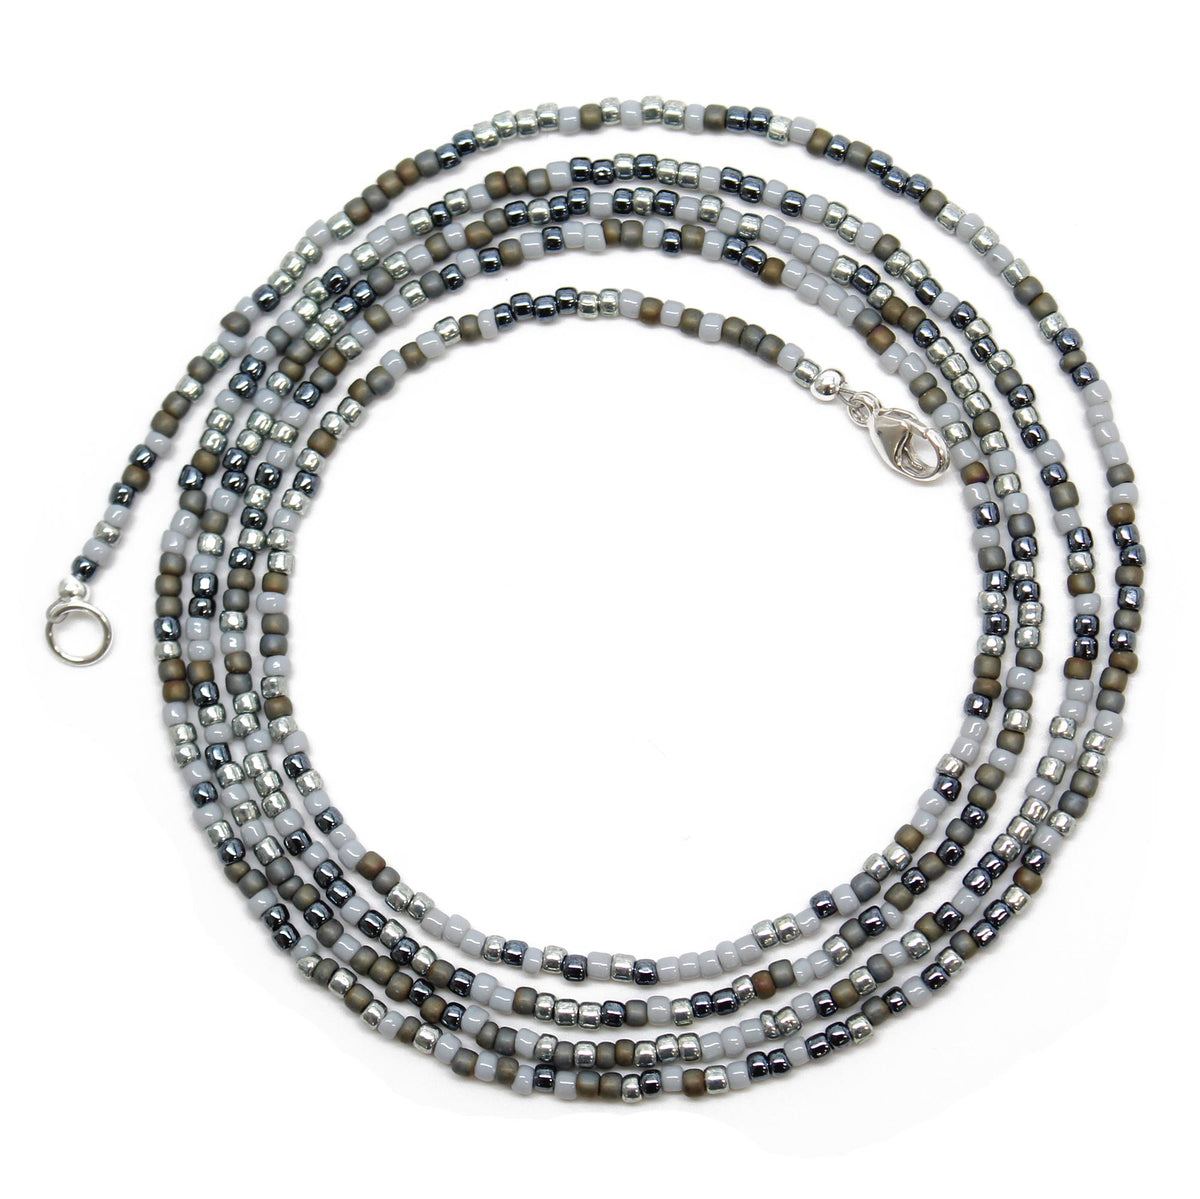 Chunky 4-Strand Triangle Glass Beads on Leather (Metallic Gray Color Mix)